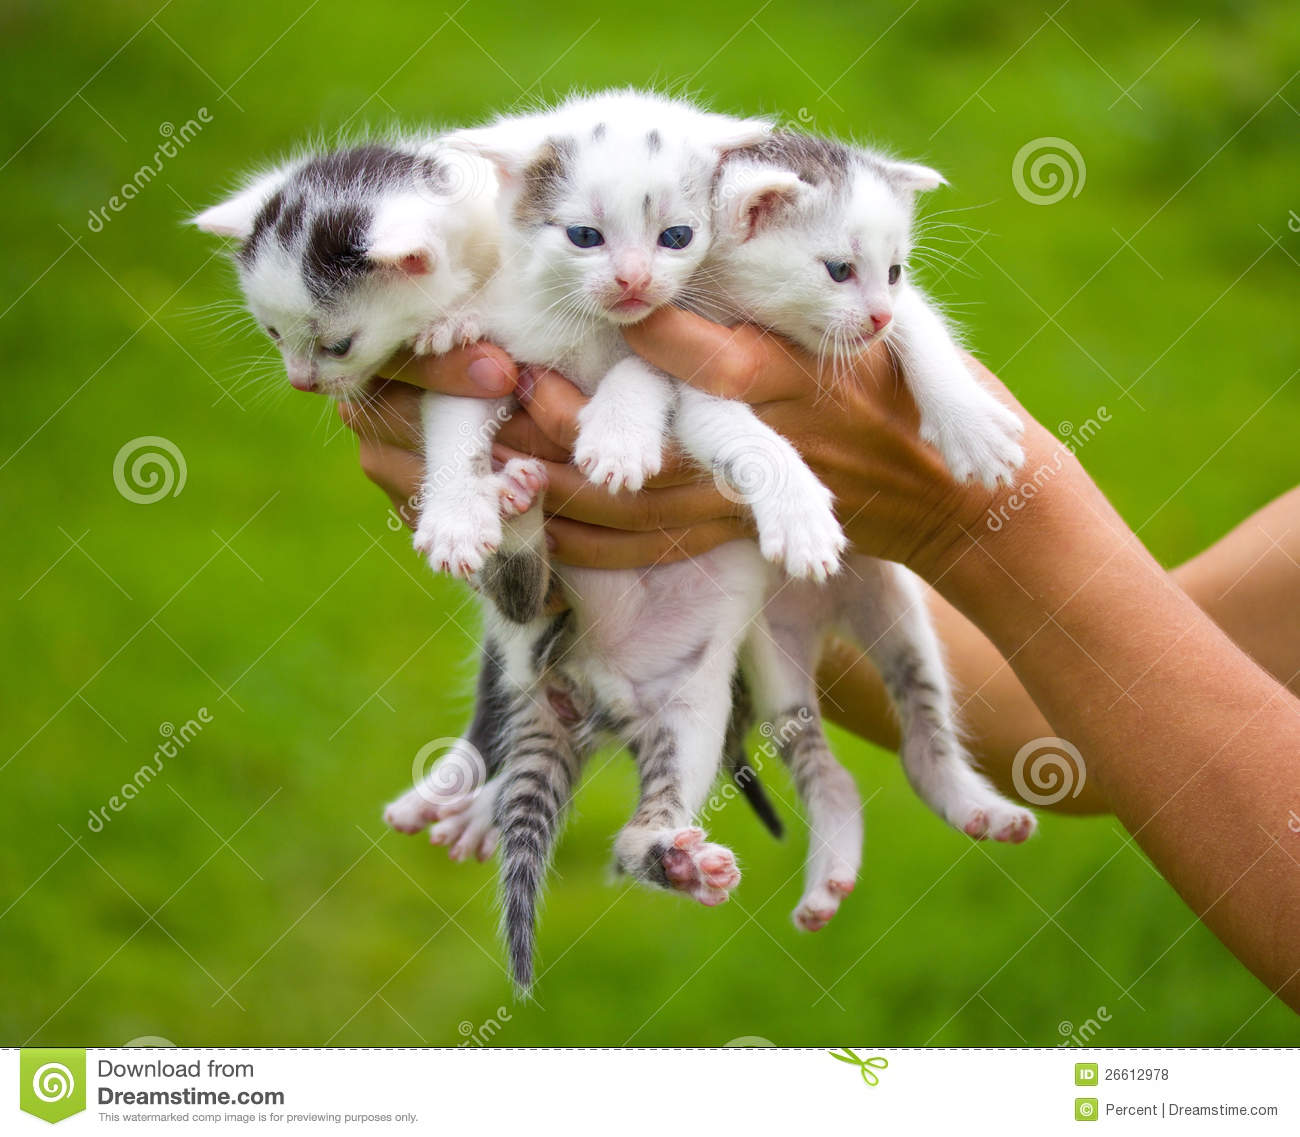 Three Little Kittens In Hands Royalty Free Stock Photos   Image    